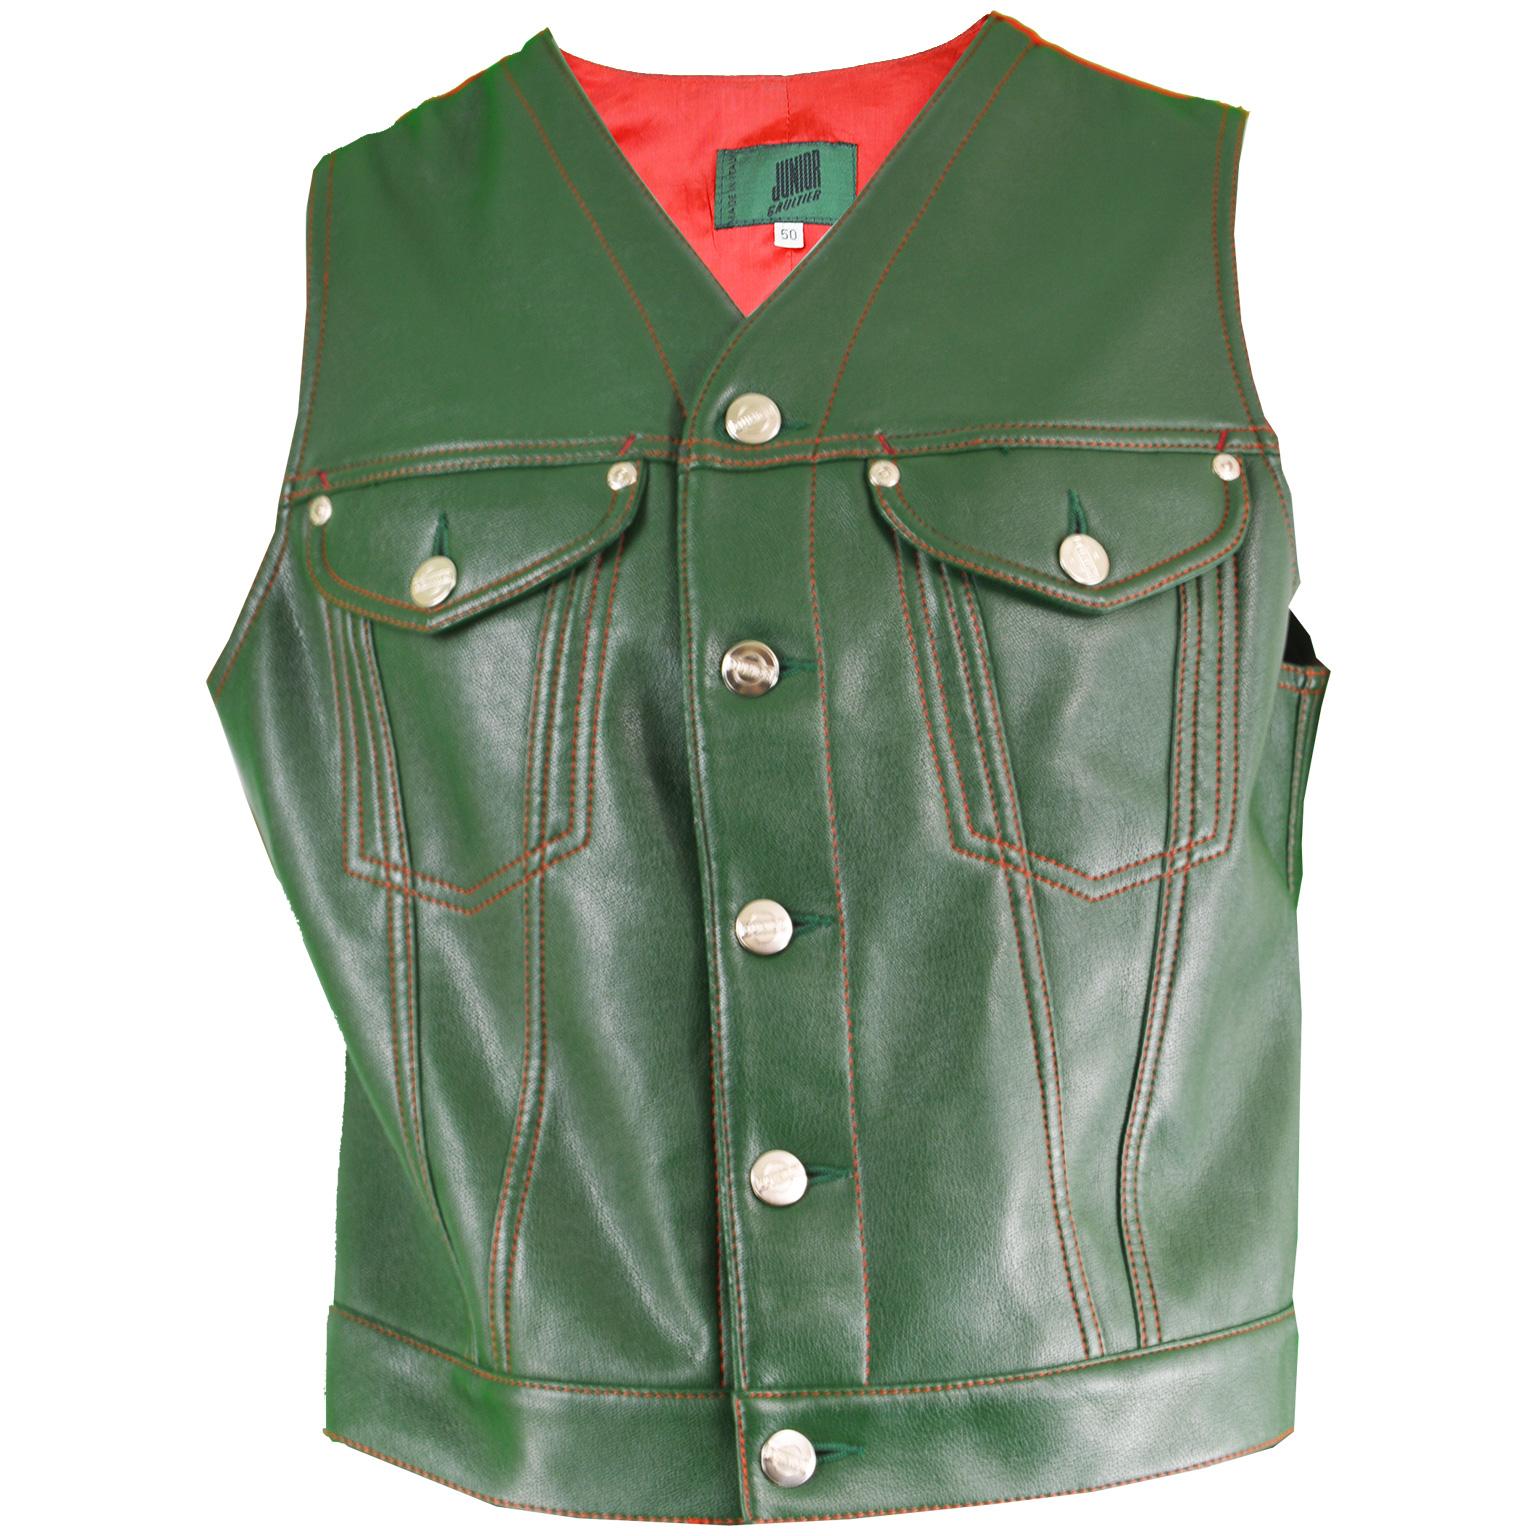 Jean Paul Gaultier Men's Green Faux Leather Vest with Red Taffeta Back, 1980s For Sale